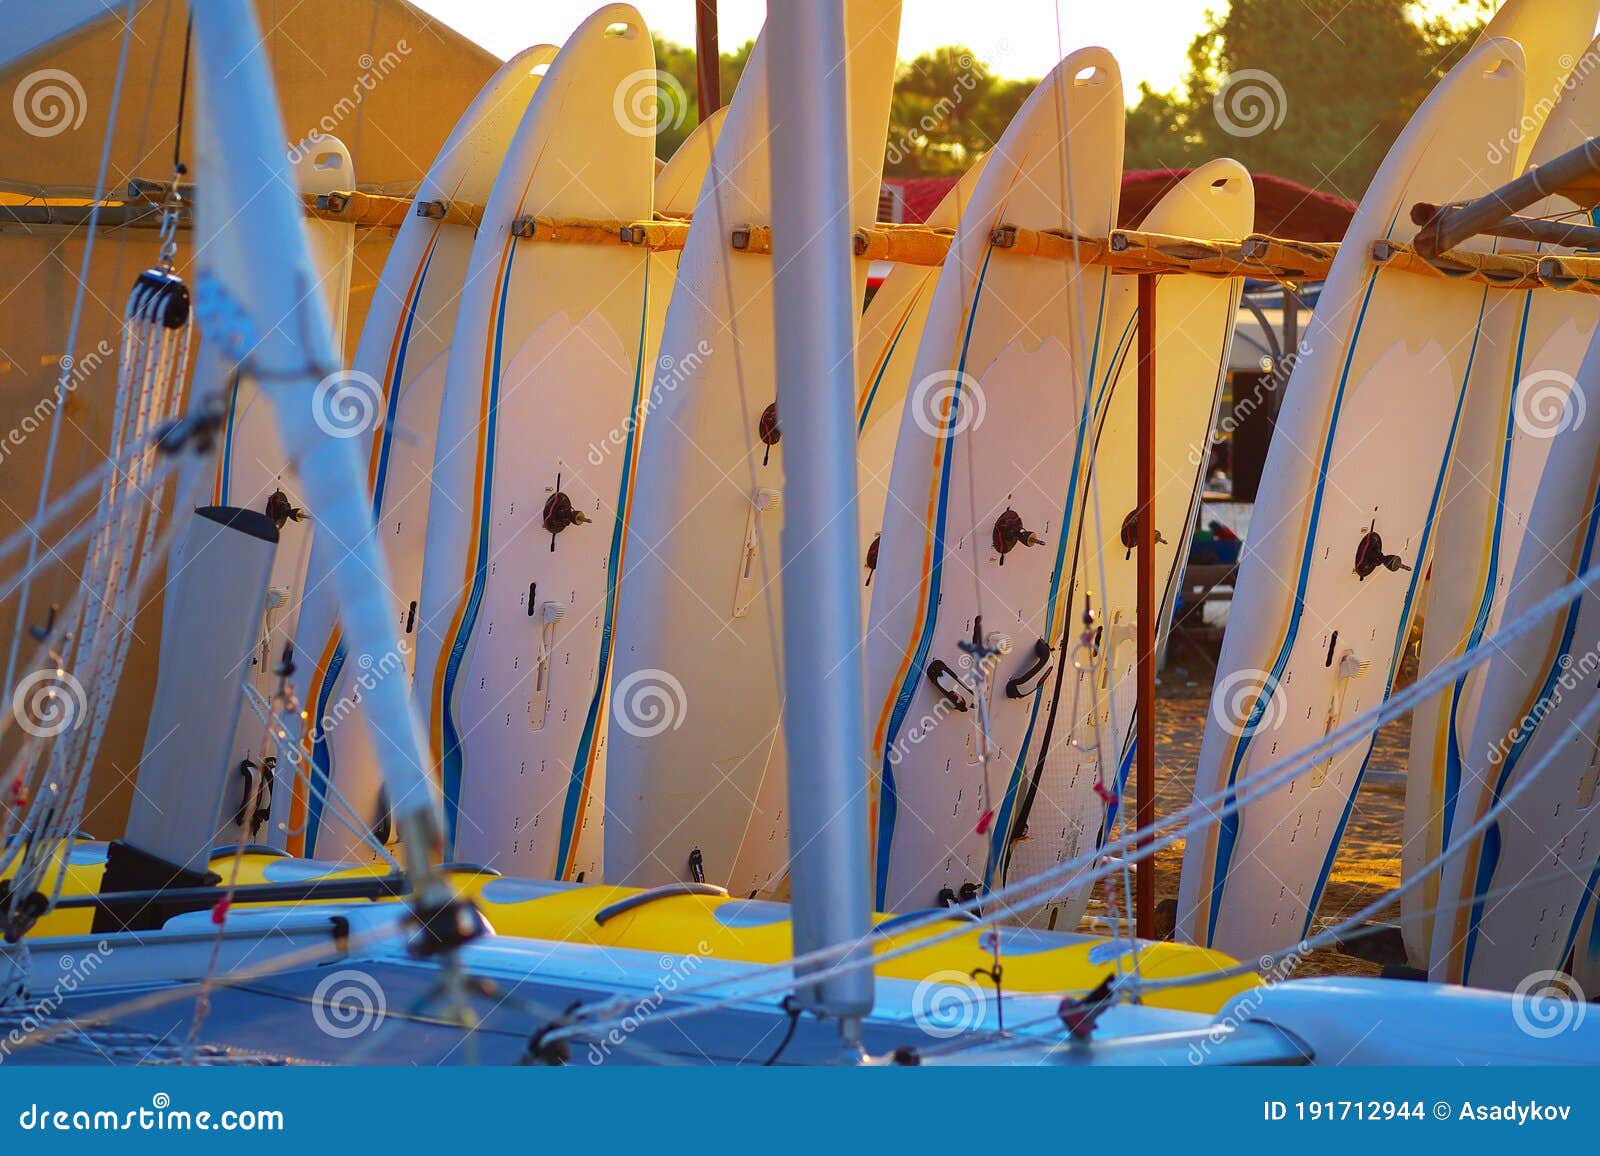 windsurfing boards storage on a beach watersports facility in early morning